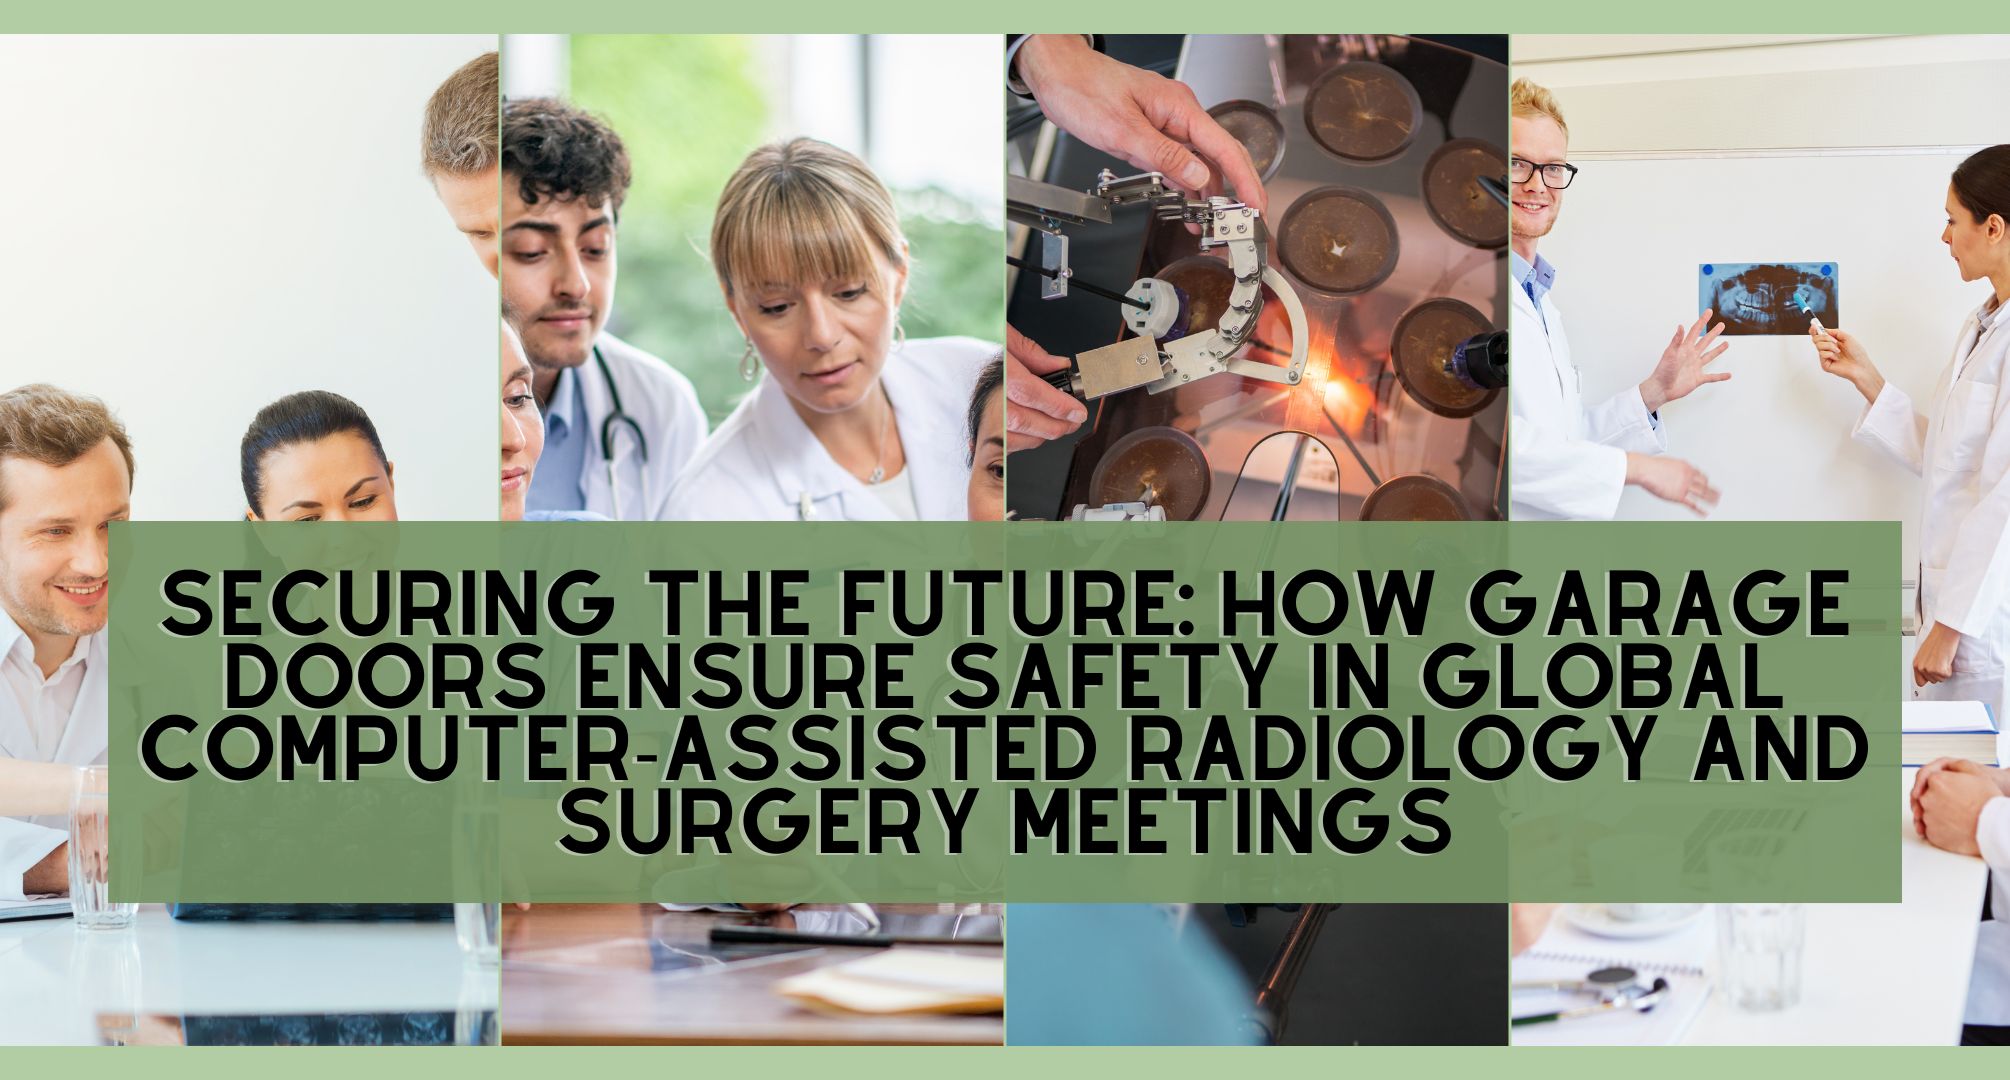 Securing the Future: How Garage Doors Ensure Safety in Global Computer-Assisted Radiology and Surgery Meetings